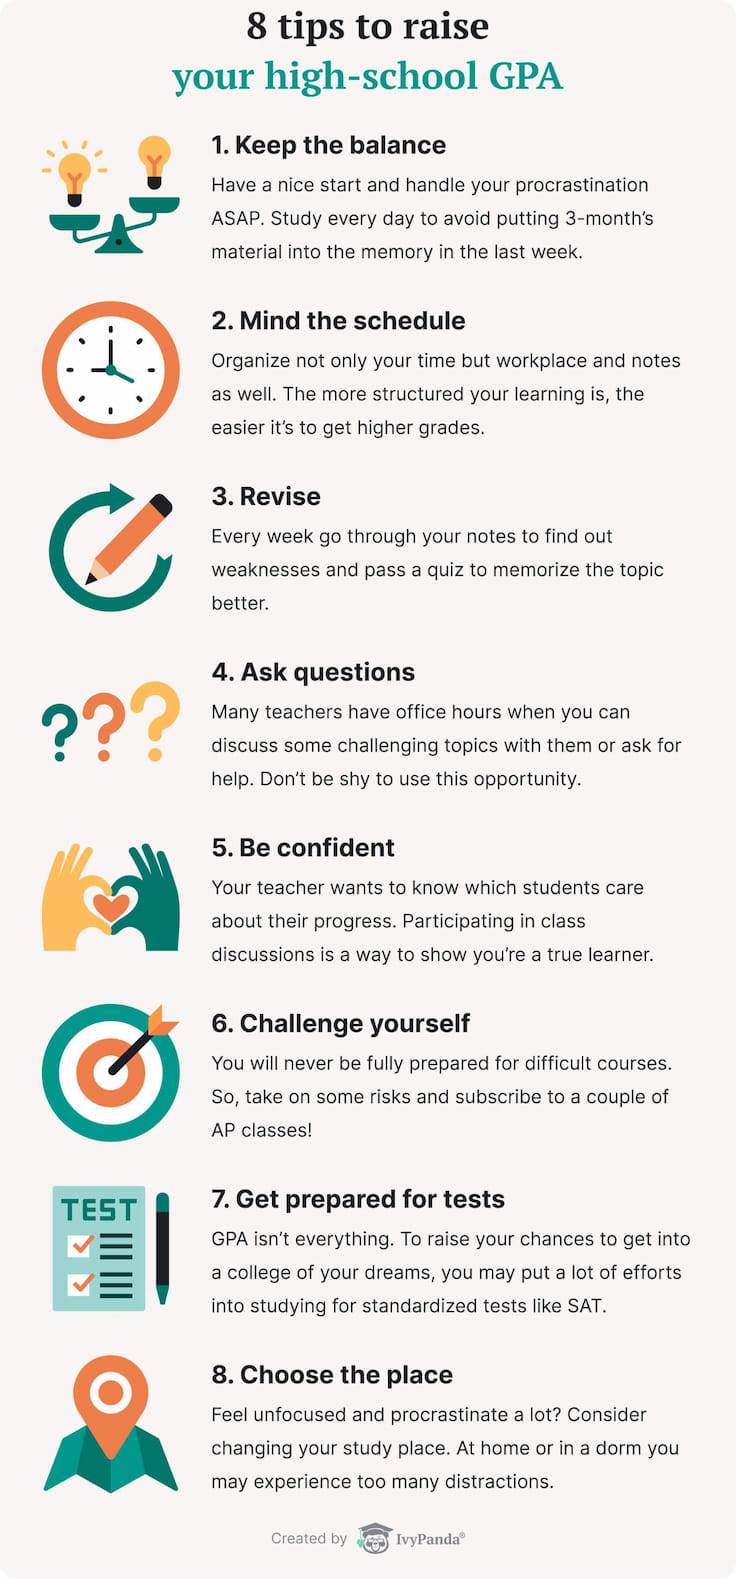 The picture lists the tips that might help one to raise their GPA.